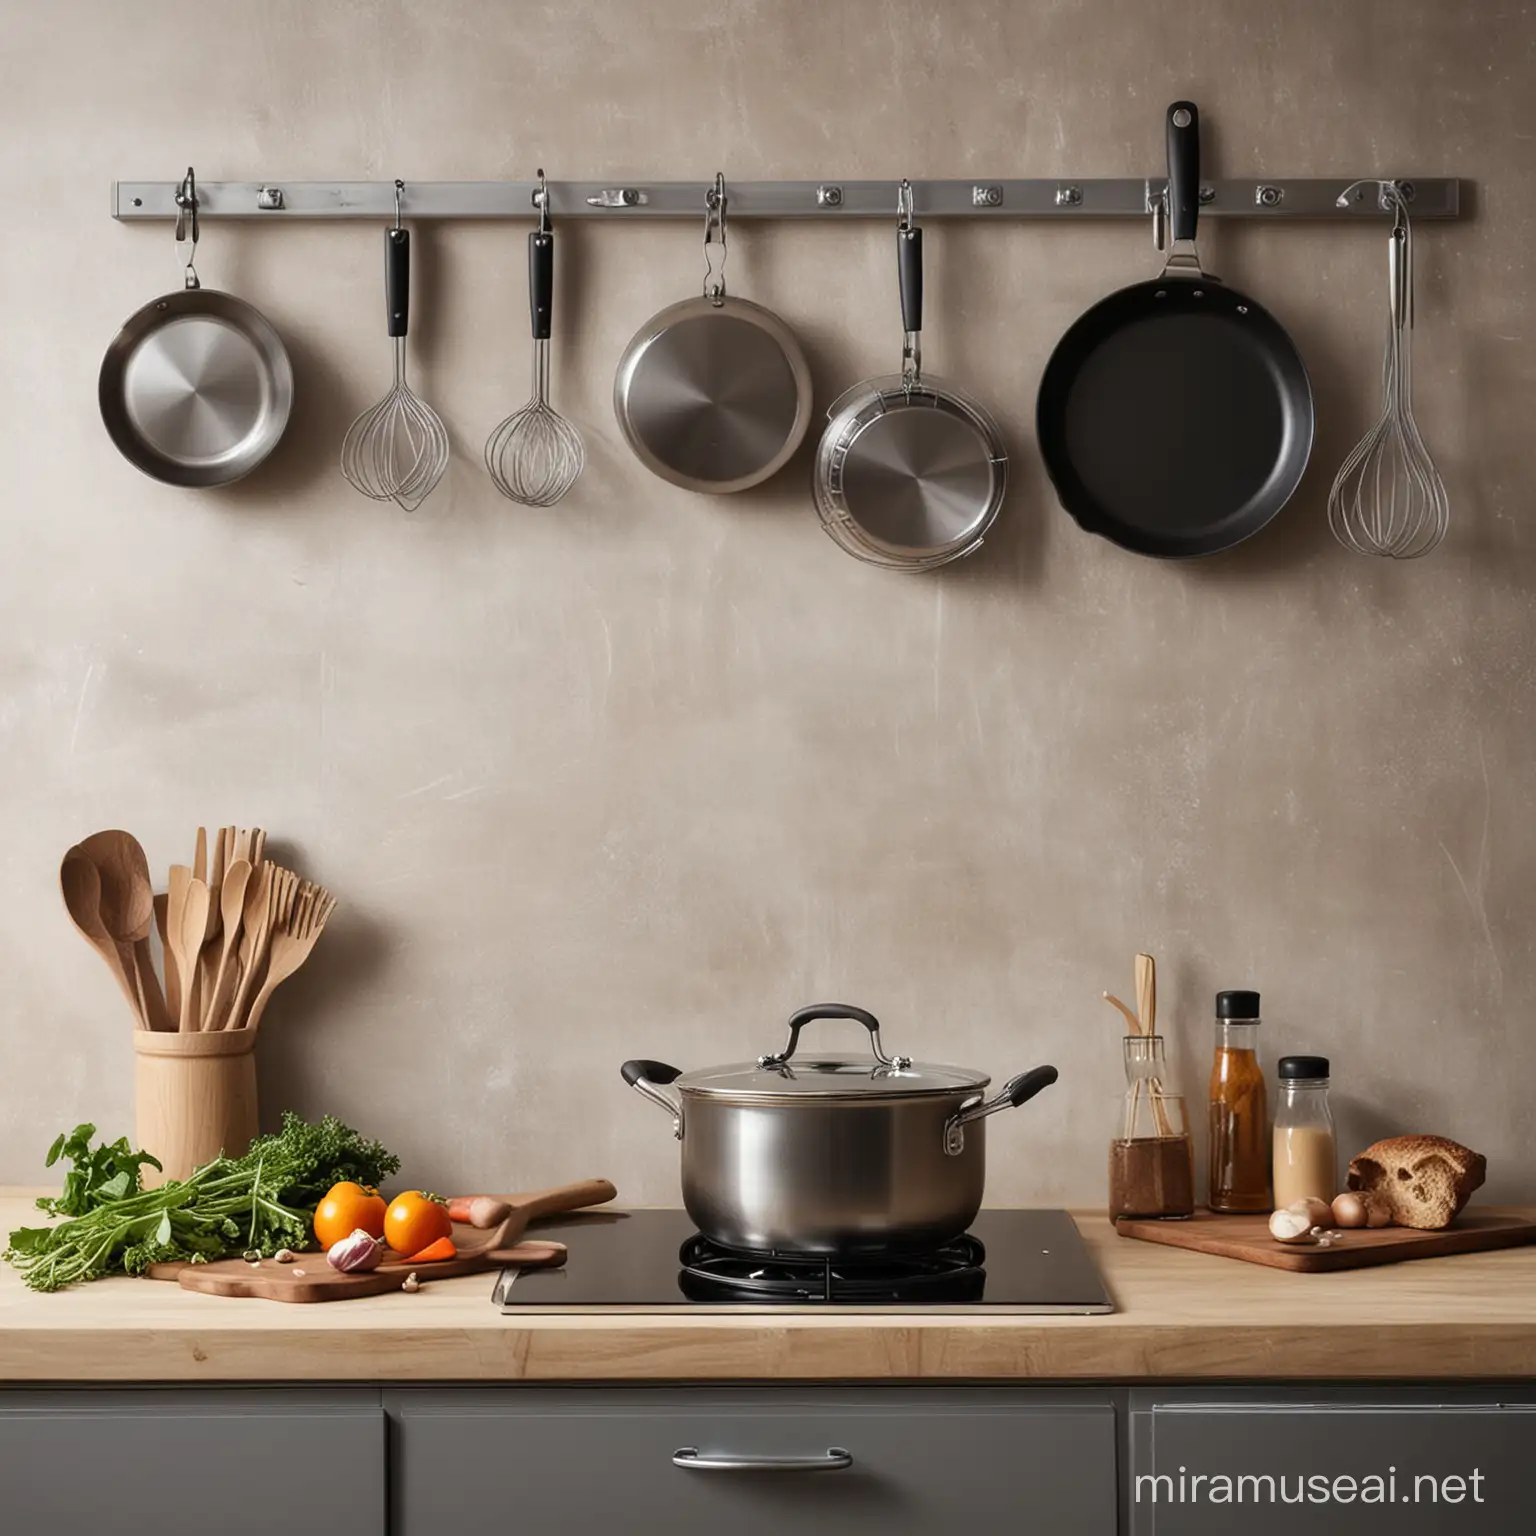 Create a beautiful and natural picture of a kithcen environment with a human using kitchen tools and modern pans for cooking